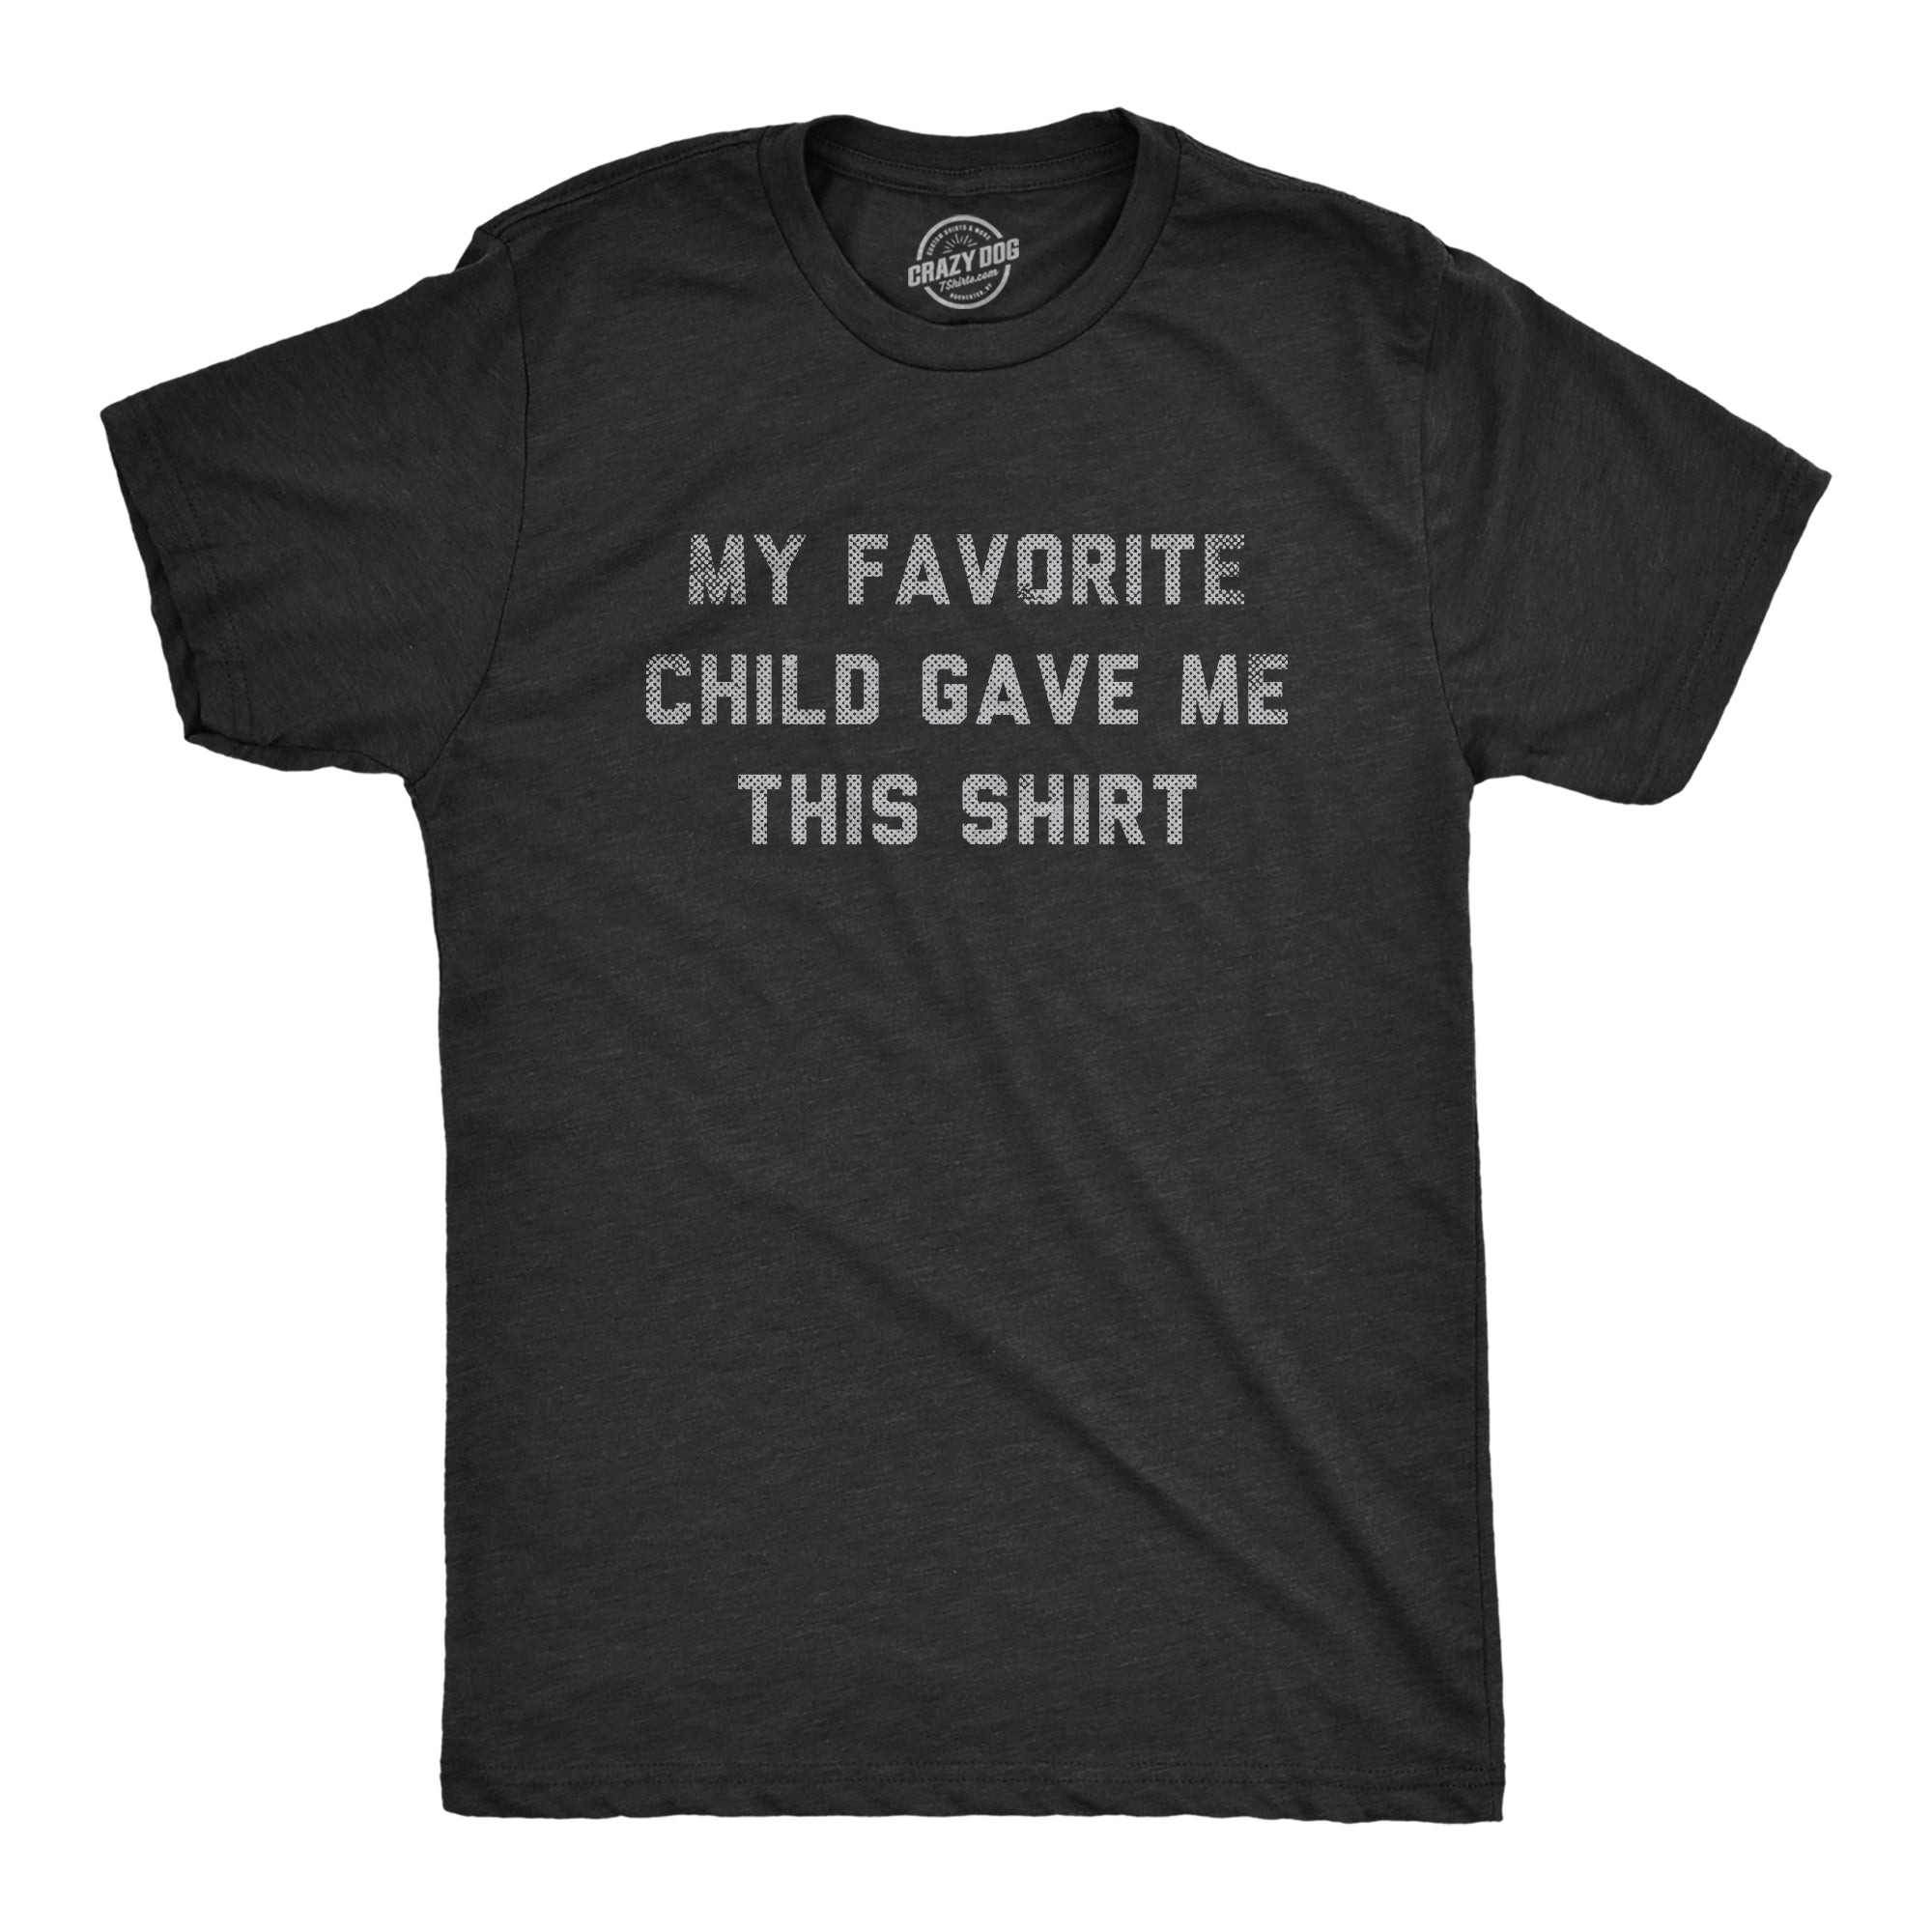 Funny Heather Black - FAVORITE My Favorite Child Gave Me This Shirt Mens T Shirt Nerdy Sarcastic Tee